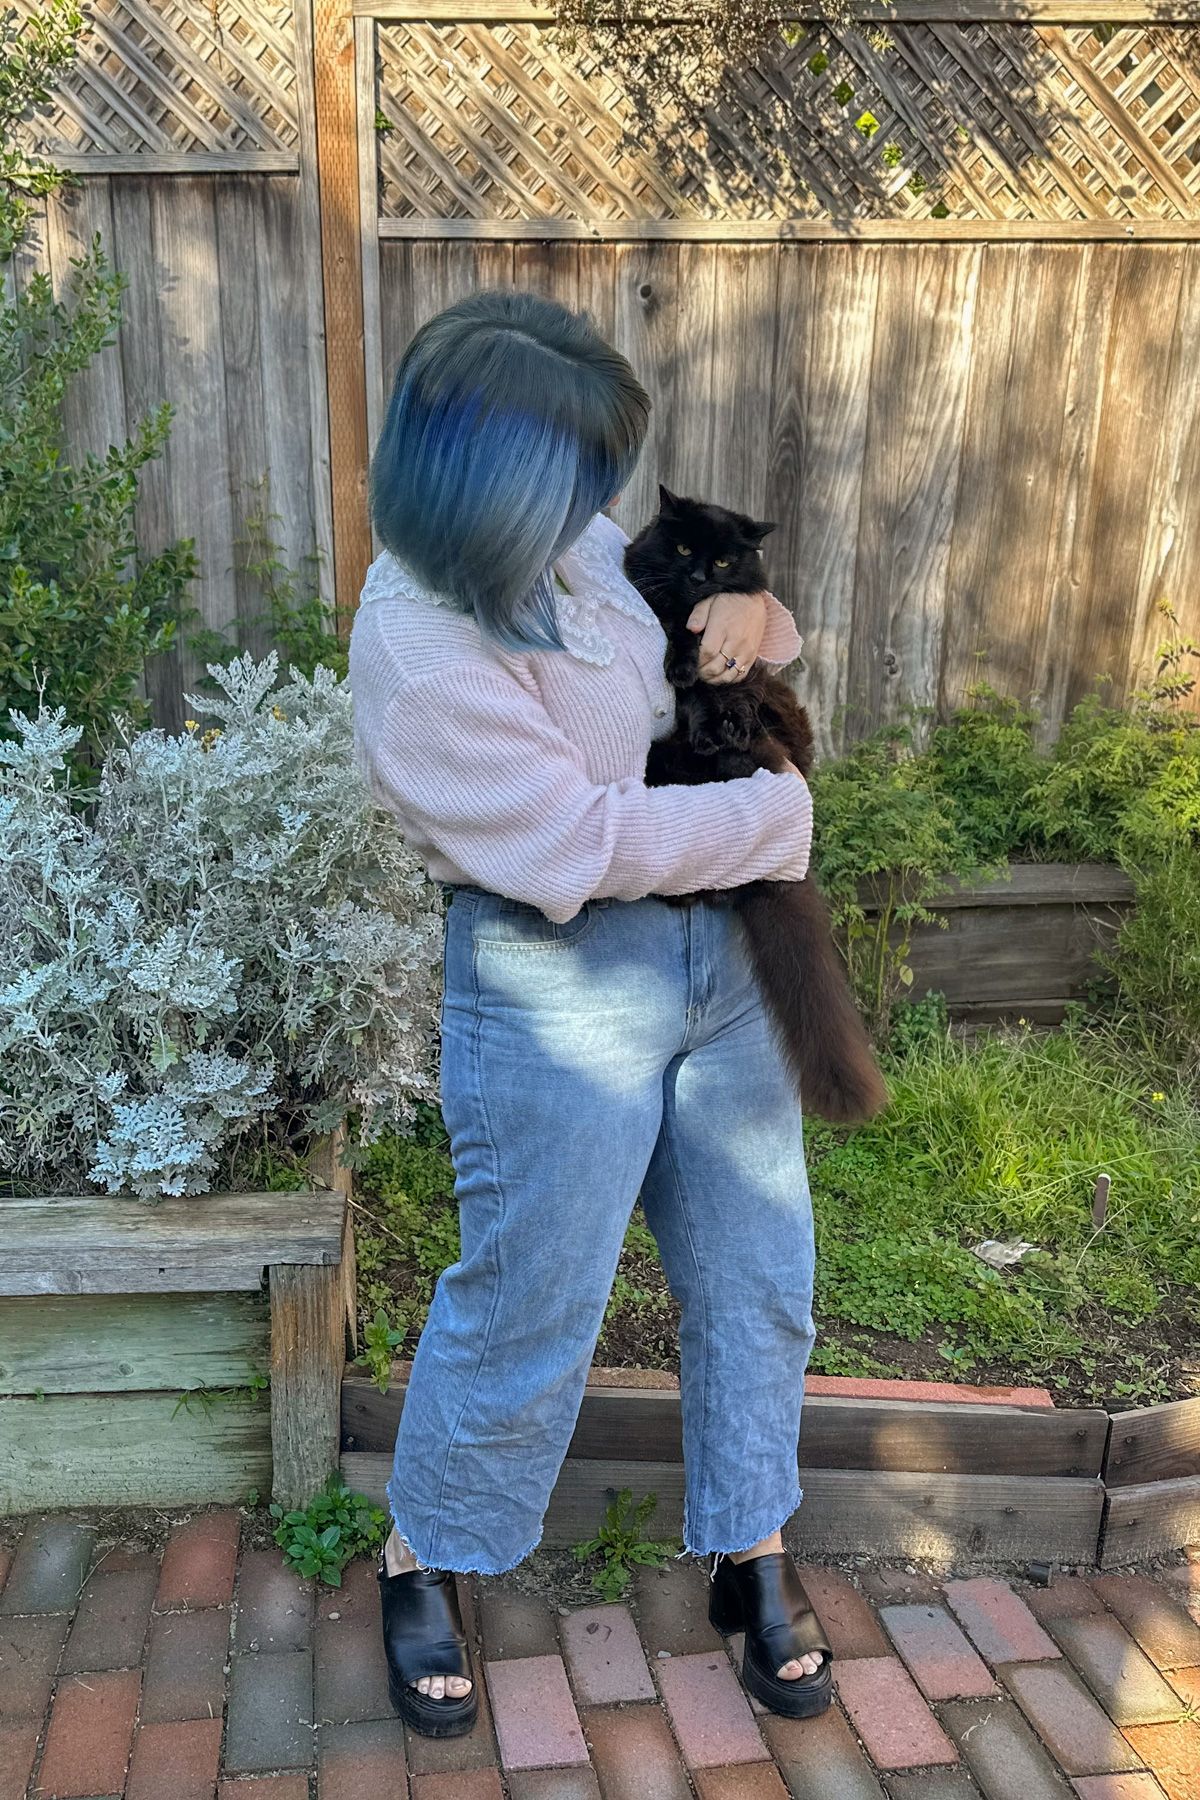 A blue-haired woman wearing a pink frilly cardigan and jeans holds a fluffy black cat while standing on a brick patio next to a patch of grass in front of a backyard fence.